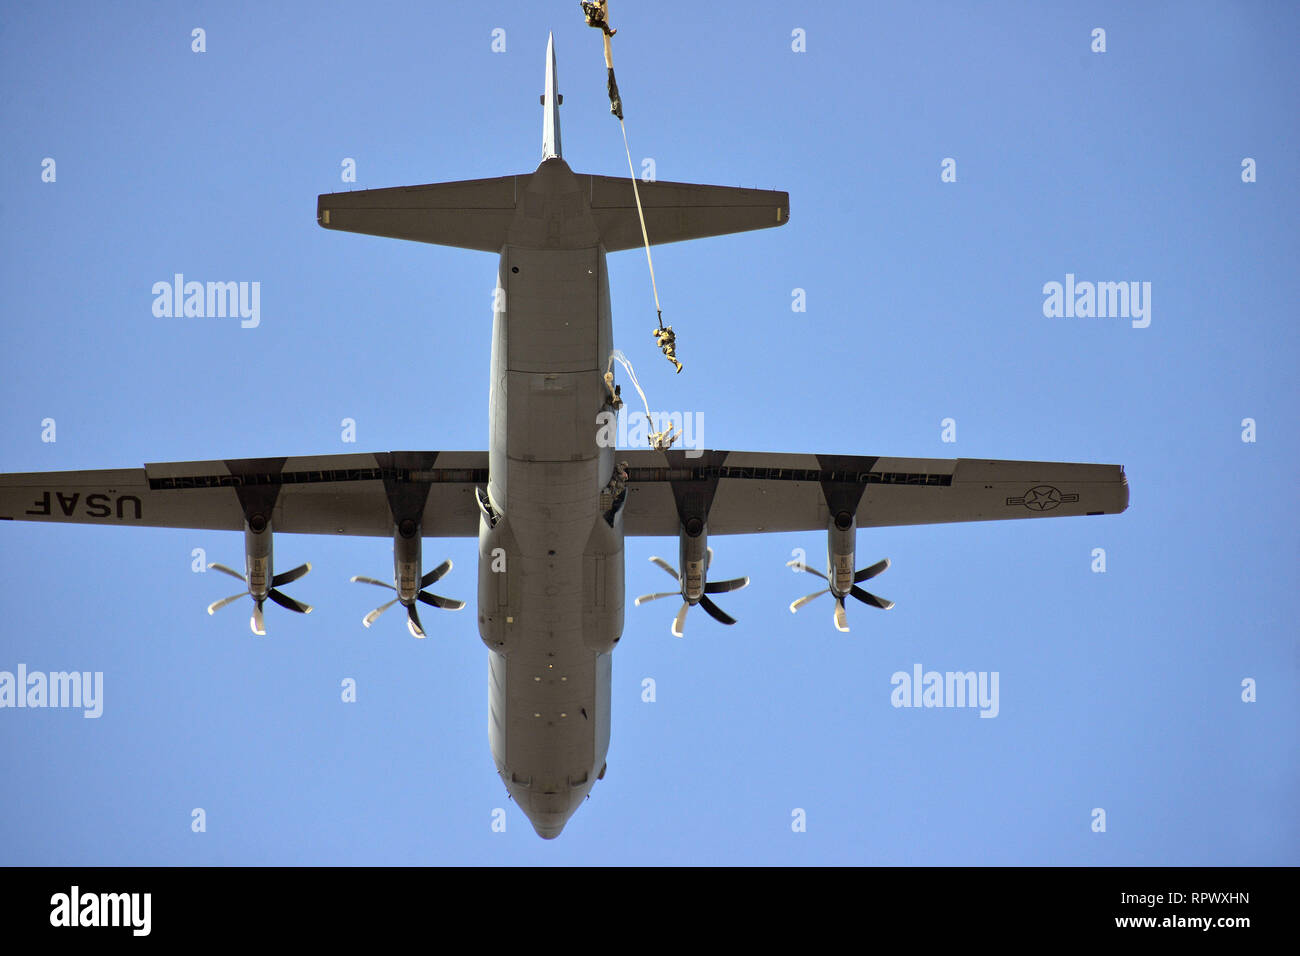 U.S. Army Paratroopers, assigned to the 173rd Brigade Support Battalion, 173rd Airborne Brigade, exit a U.S. Air Force C-130 Hercules aircraft from the 86th Air Wing at Juliet Drop Zone, Pordenone, Italy, Feb. 21, 2019 during airborne operation. The 173rd Airborne Brigade is the U.S. Army Contingency Response Force in Europe, capable of projecting ready forces anywhere in the U.S. European, Africa or Central Commands' areas of responsibility. (U.S. Army Photo by Paolo Bovo) Stock Photo